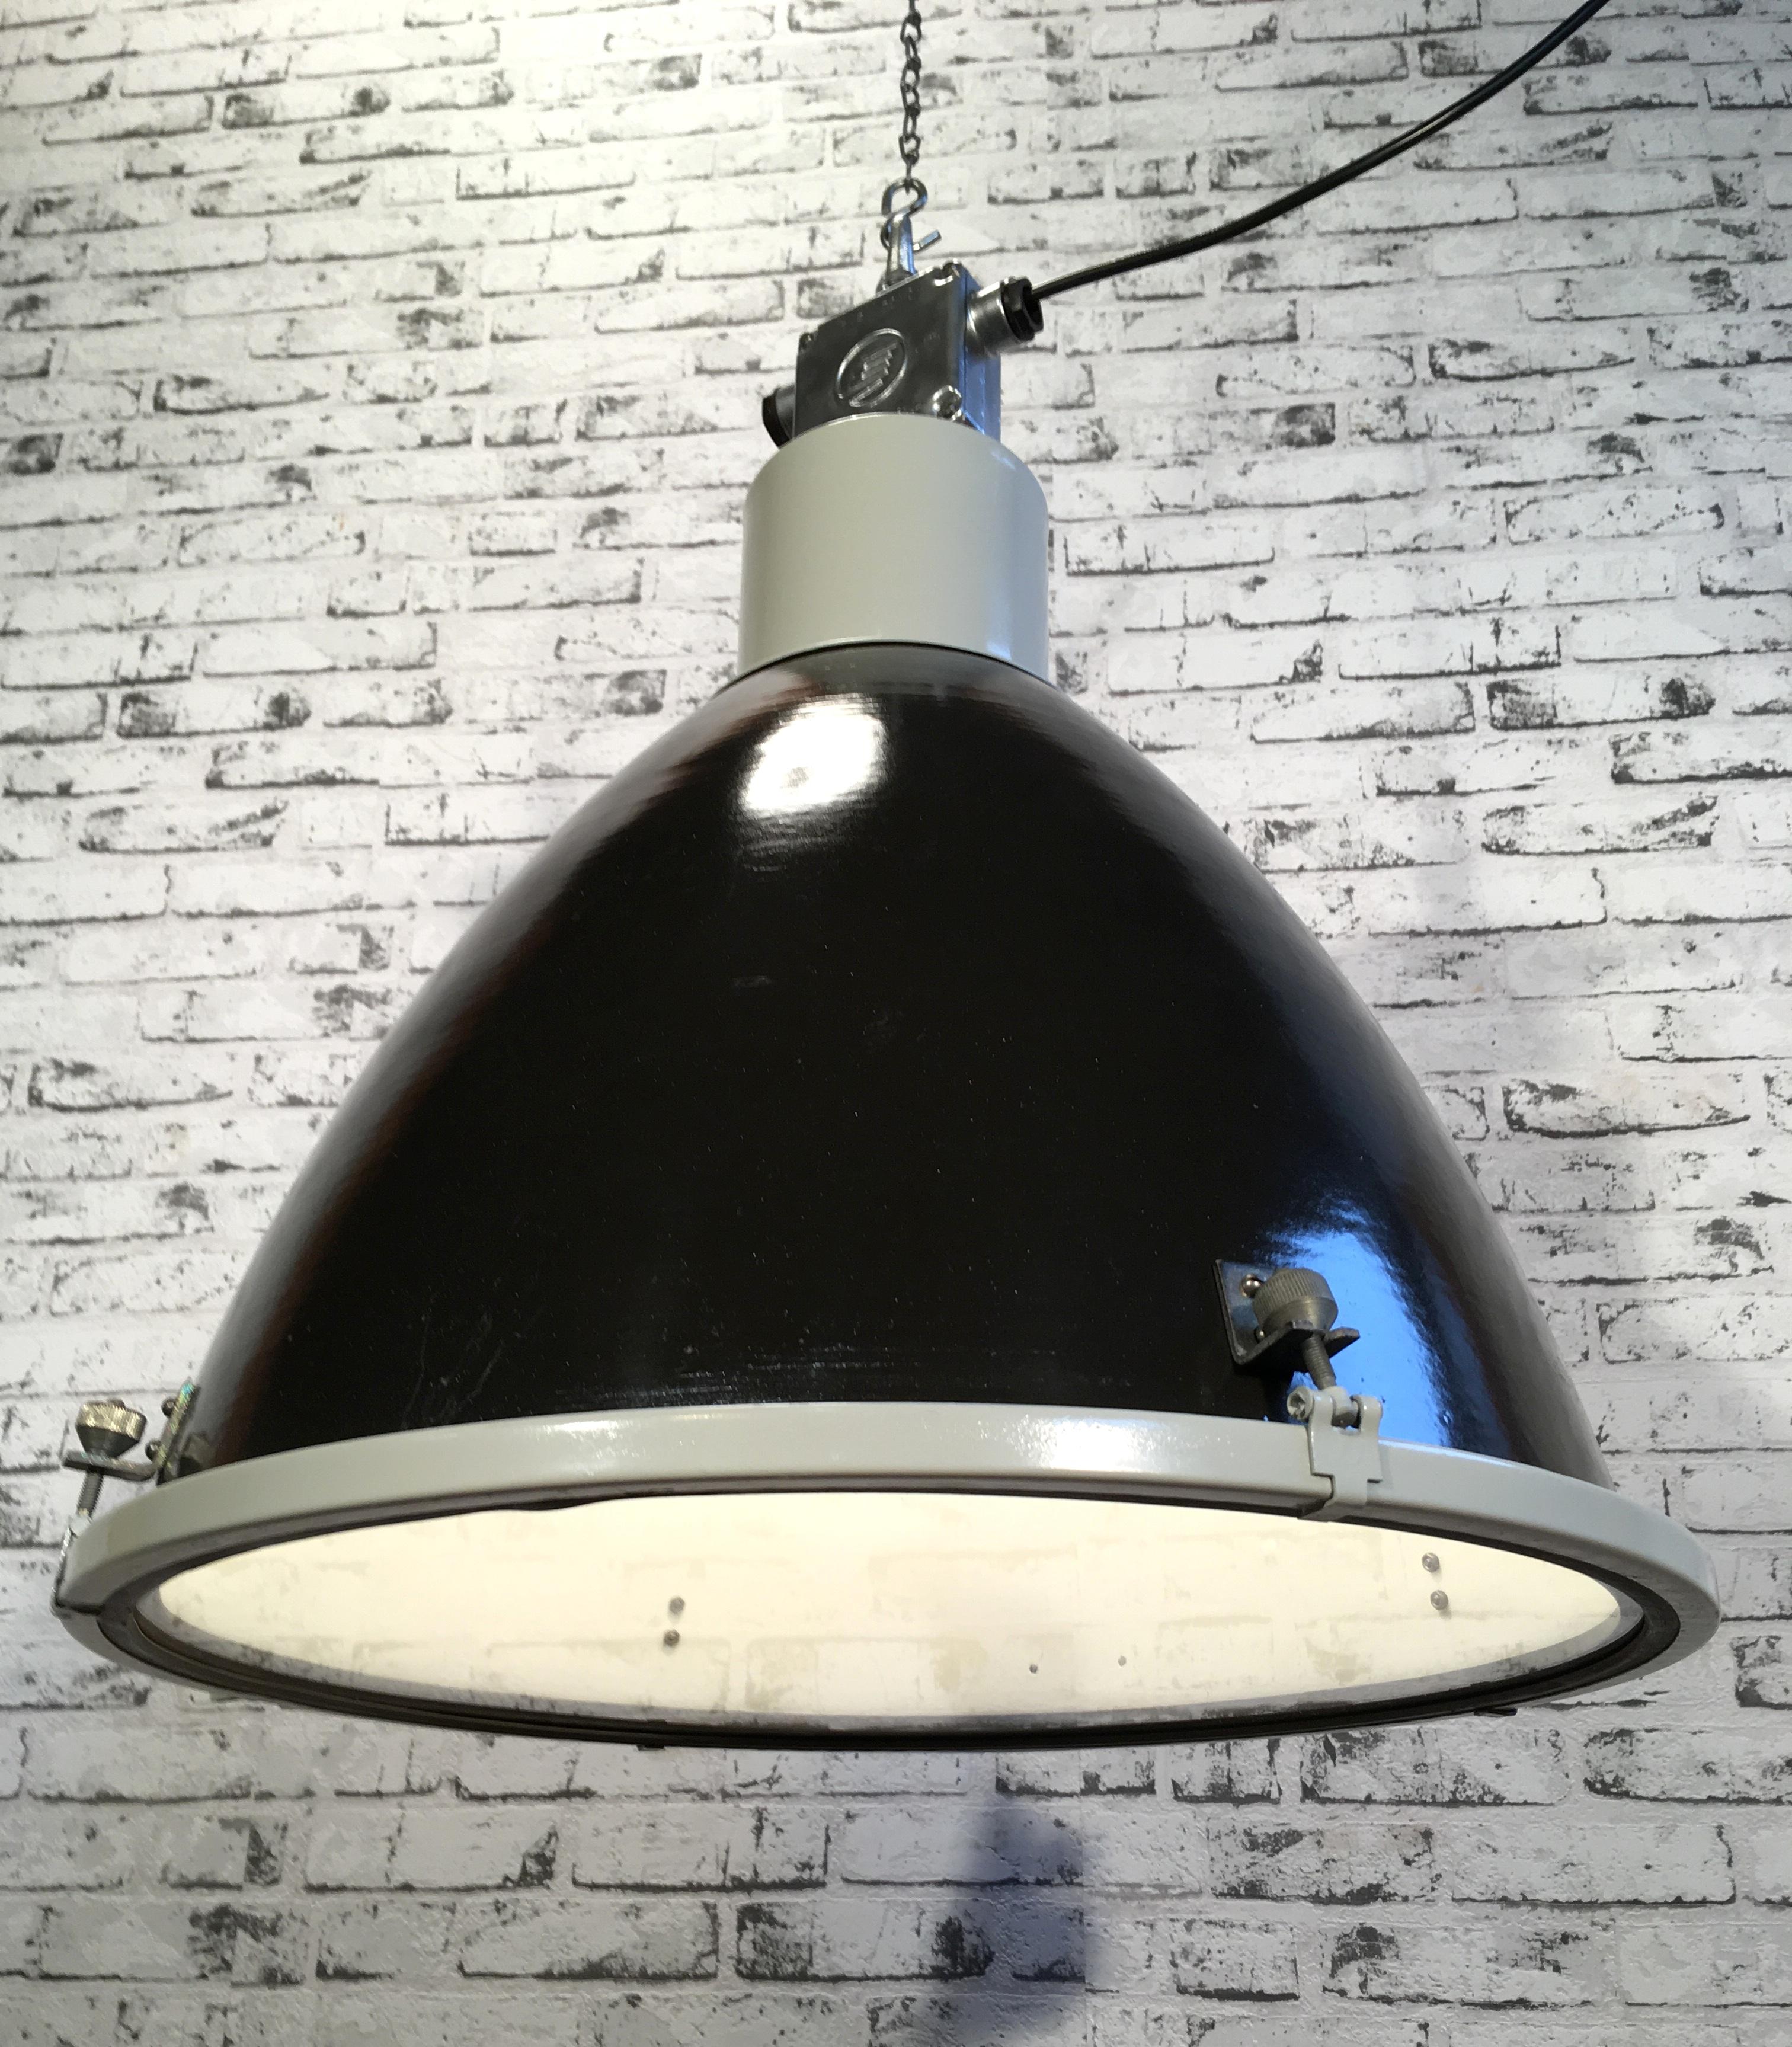 Enameled Large Vintage Industrial Black Enamel Factory Lamp with Glass Cover